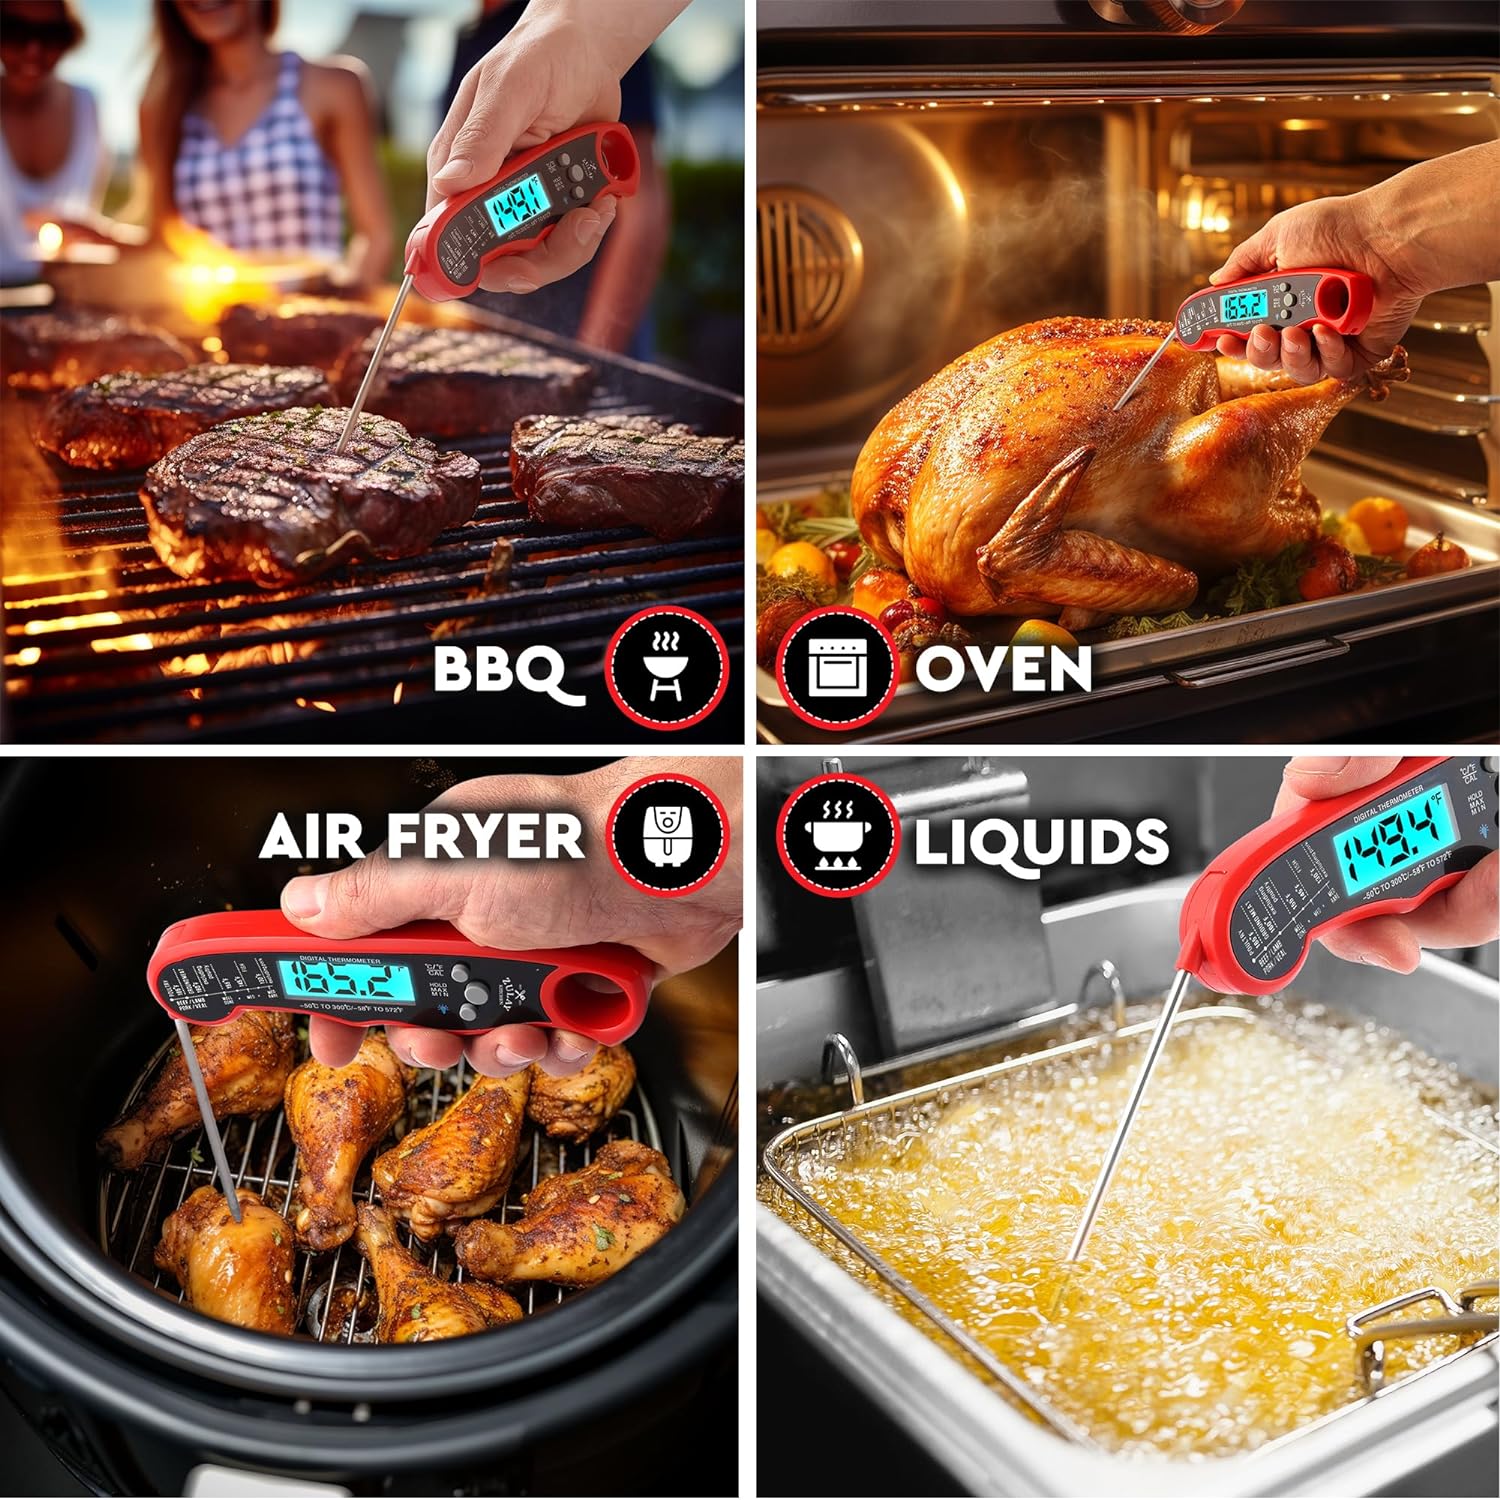 Where to use Digital Meat Thermometer